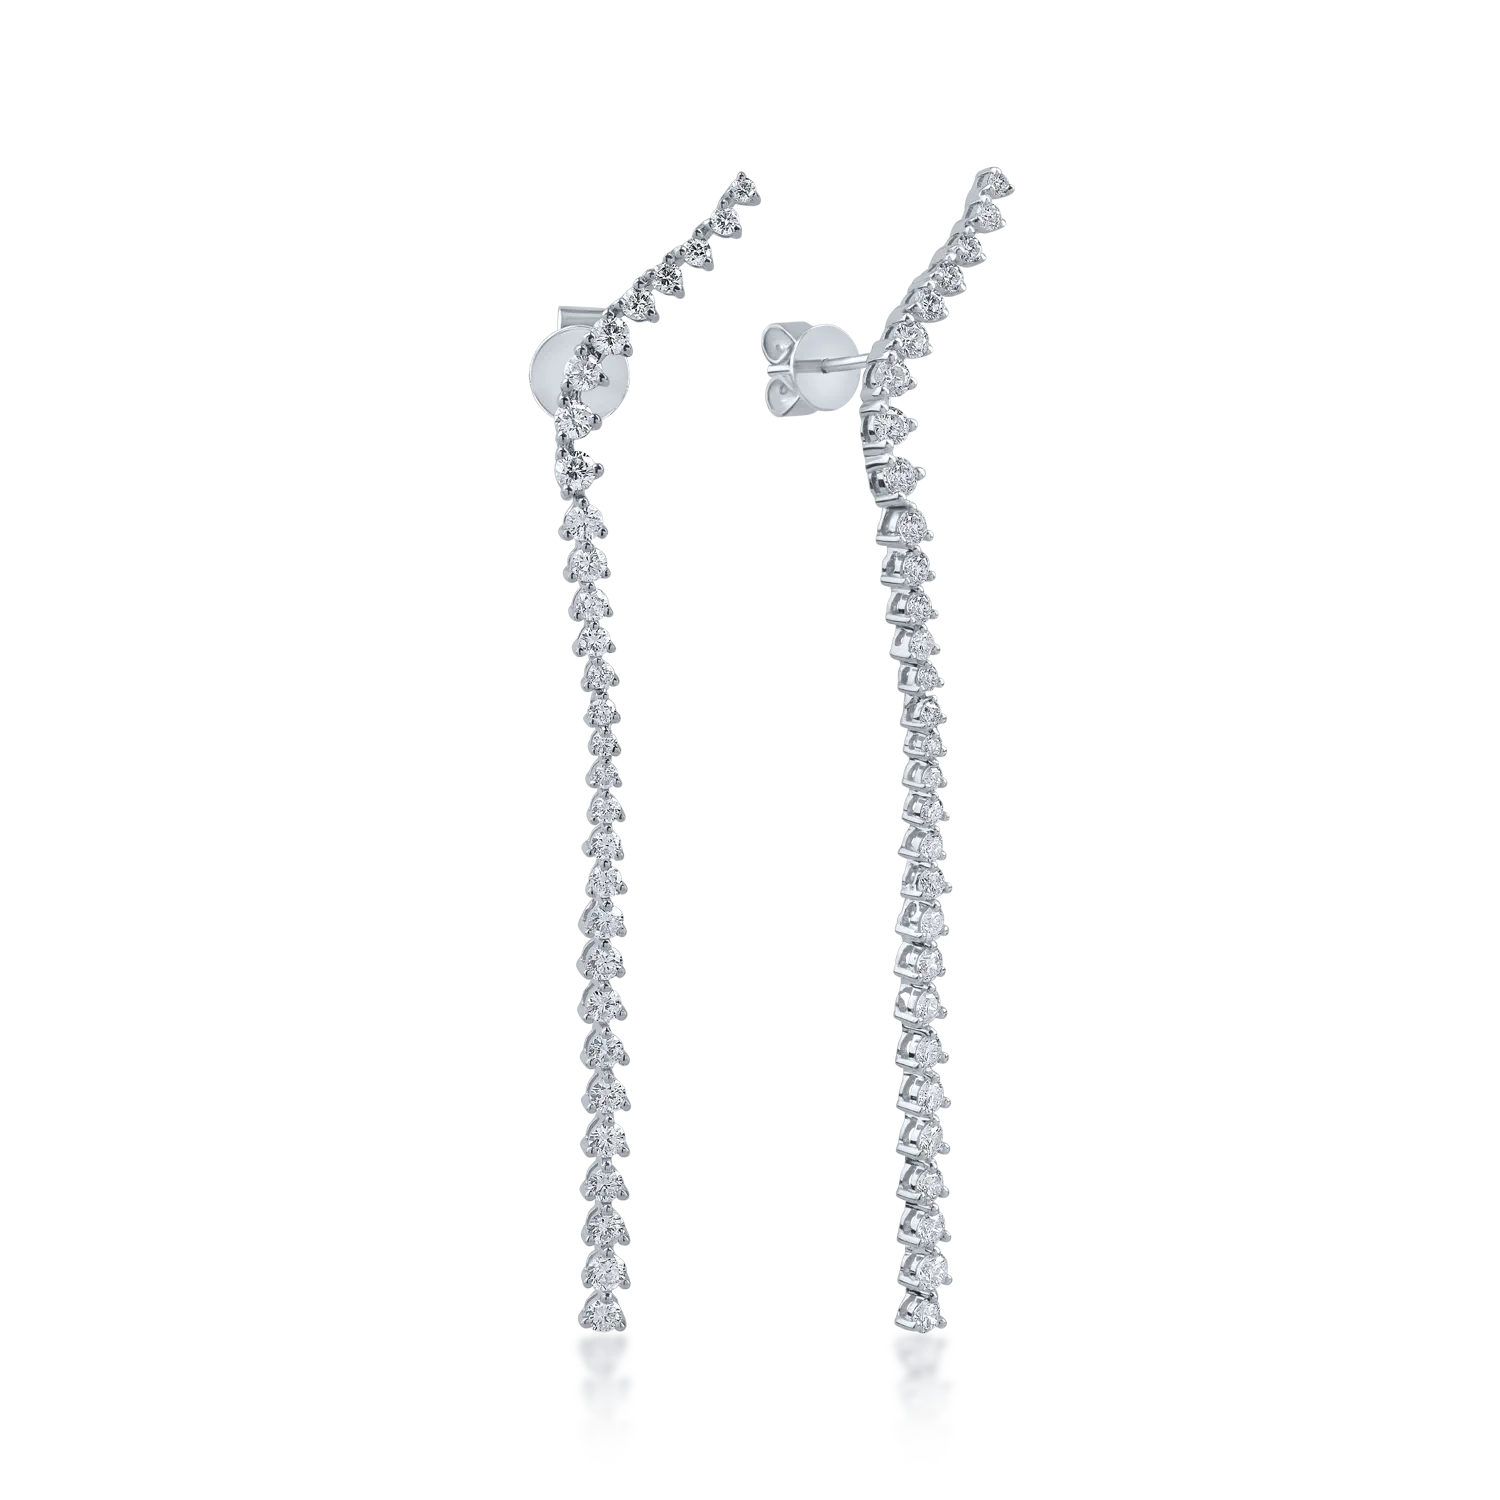 White gold long earrings with 1.83ct diamonds